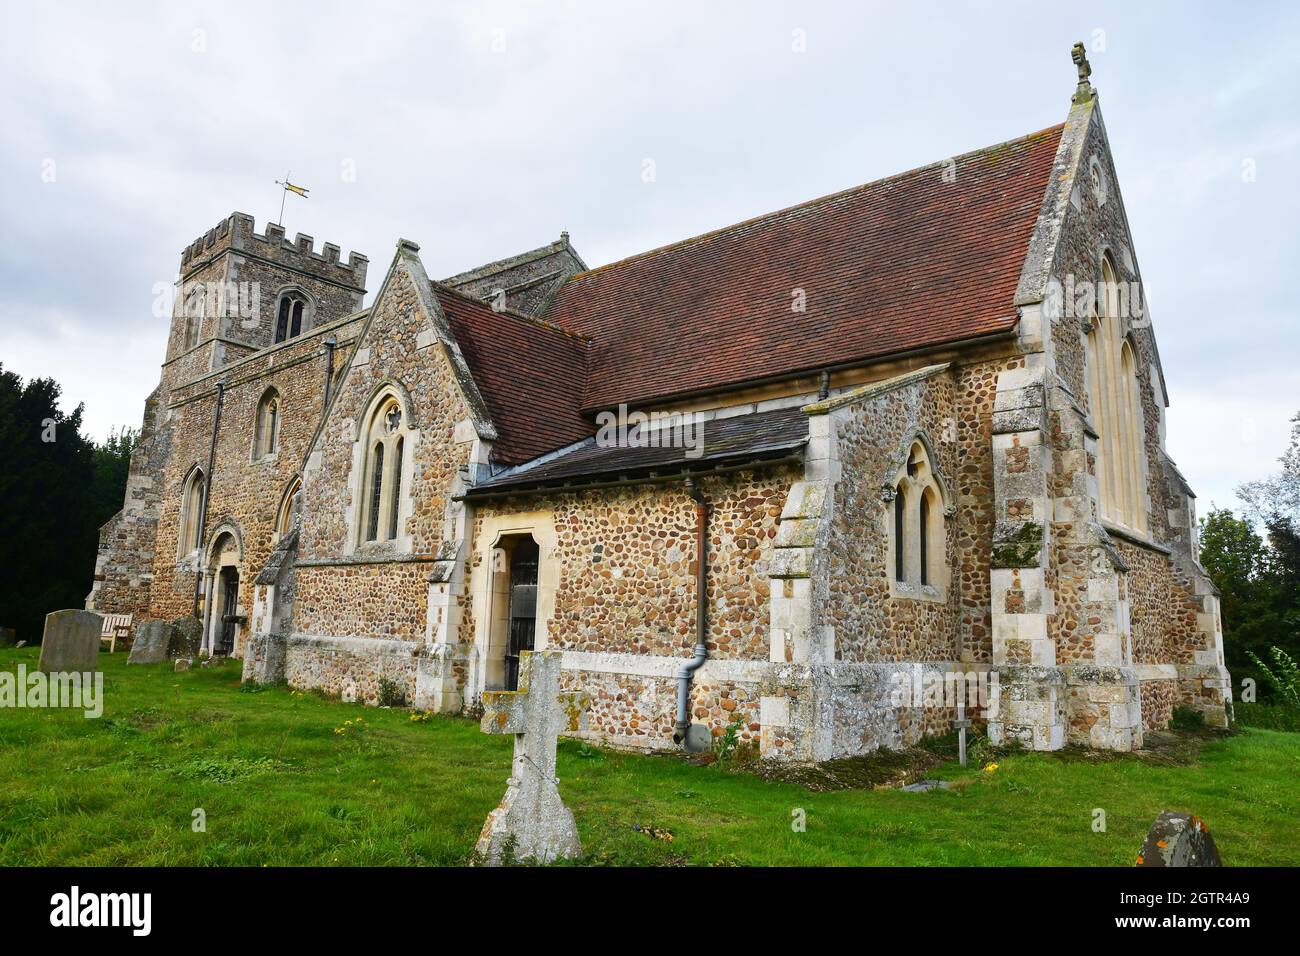 St Denys' Church in the grounds of the Old Manor at Little Barford, near St Neots, Cambridgeshire, UK Stock Photo